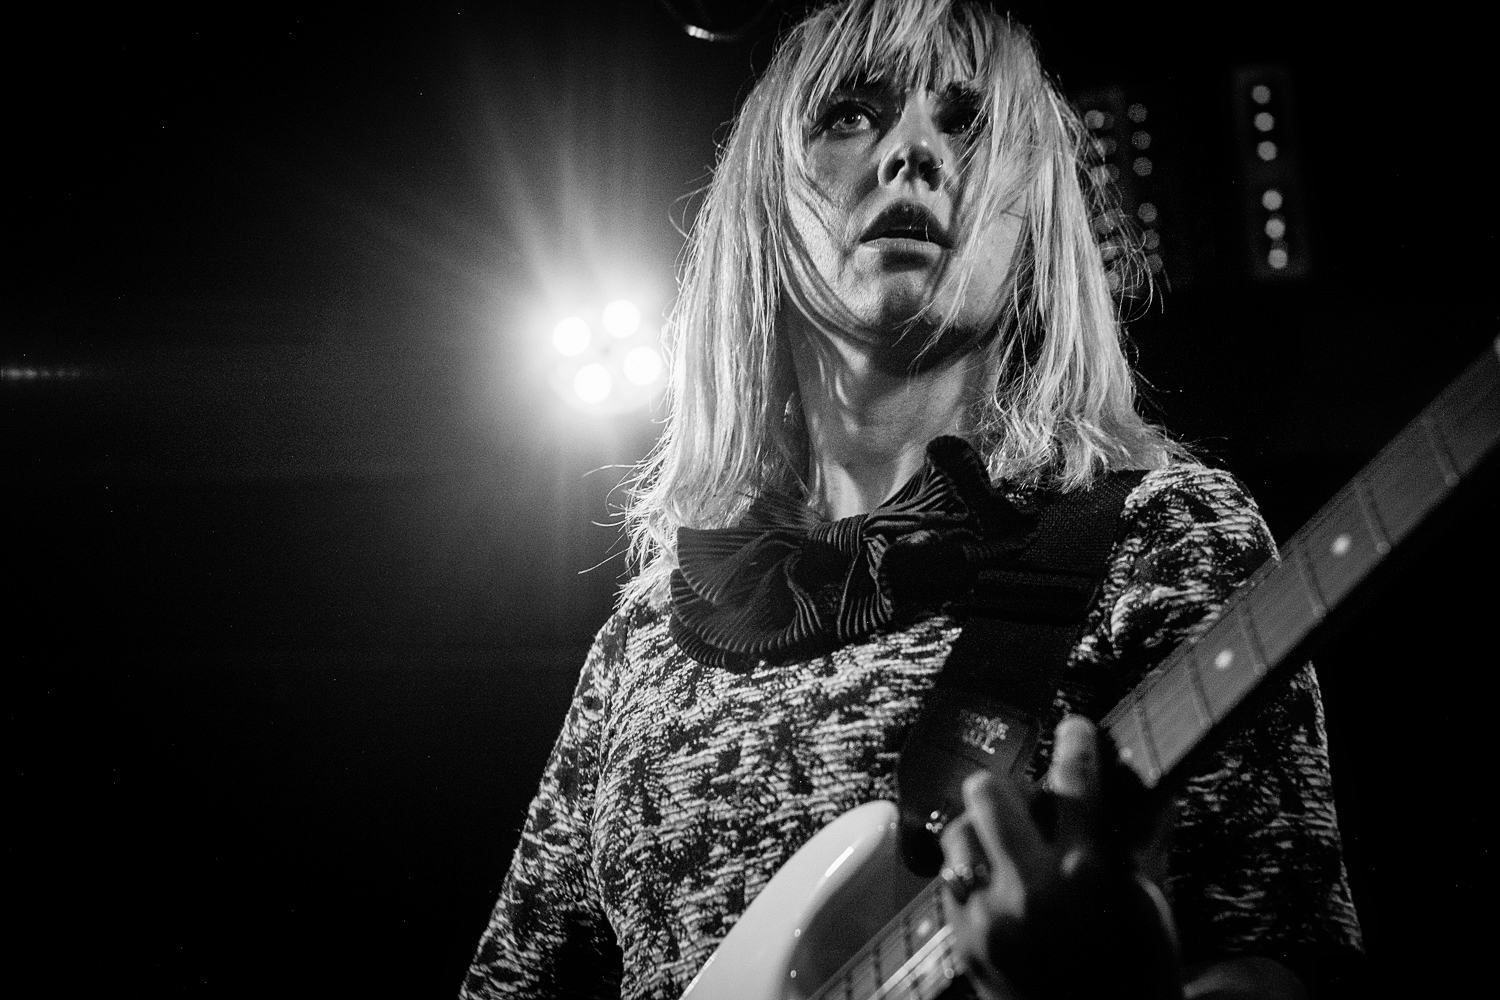 20180820-014-The-Joy-Formidable-@-Blue-Shell-Köln-Cred_Michael_Lamertz_@indie.and_.more_.jpg